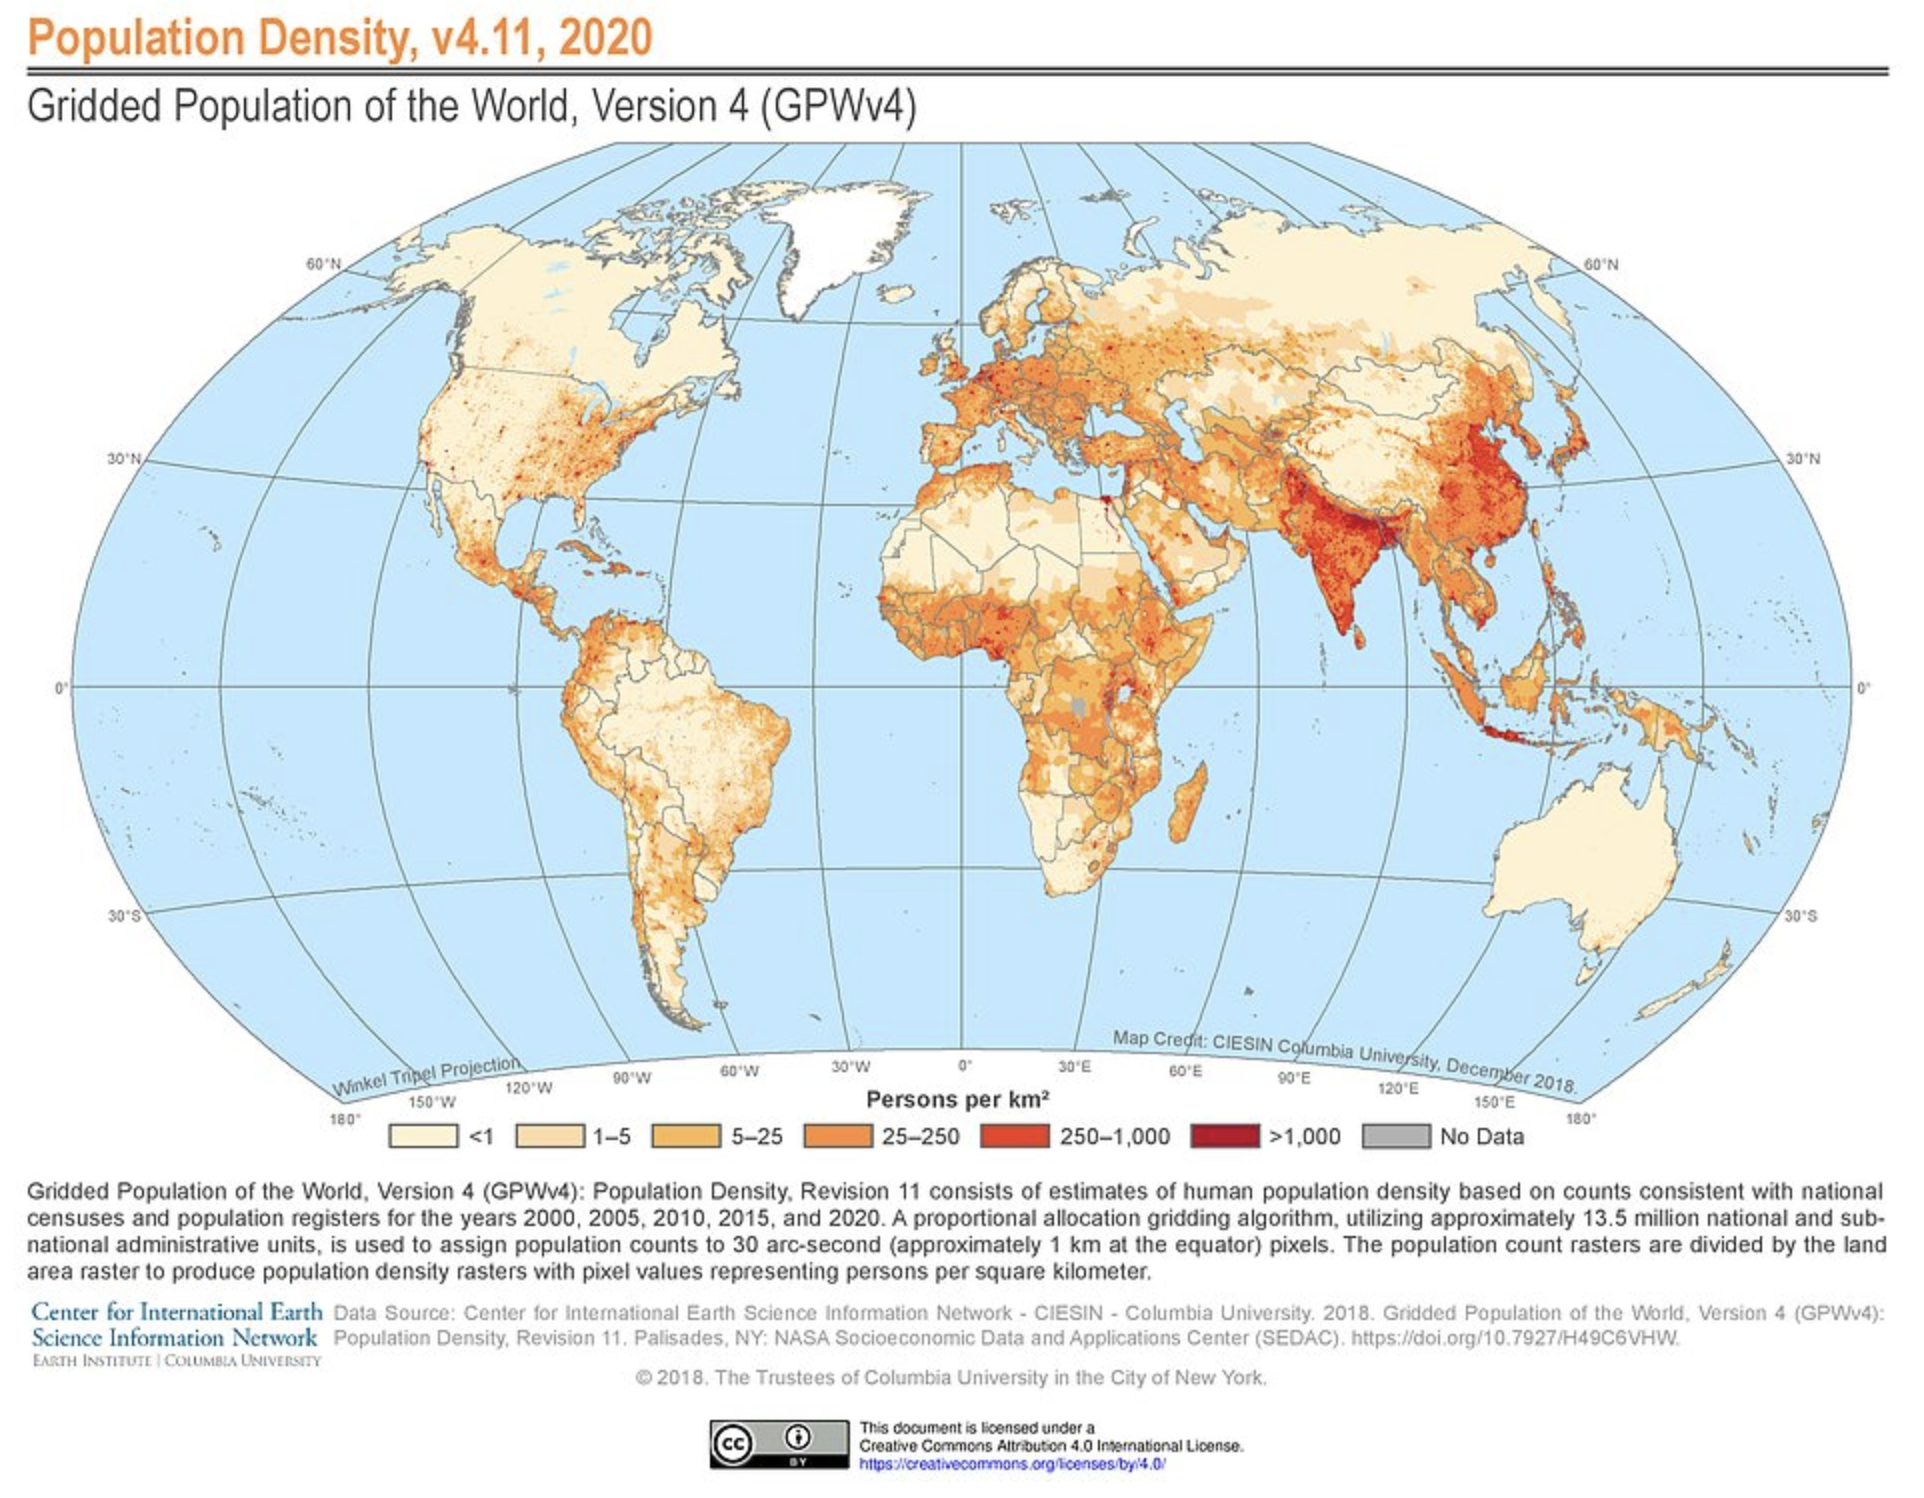 Gridded population of the world (version 4) illustrating population density for the year 2020. Density is indicated with darker or lighter shading using the following categories in persons per square kilometer (<1, 1-5, 5-25, 25-250, 250-1000, >1000, and no data). North America has highest densities on the east coast of the United States, southern Mexico, Central American countries, and western and eastern coastlines of South America. All of Europe is high density. Africa has the highest densities in countries in the middle of the coninent. In Asia, India, eastern China along with asian islands have very high densities.